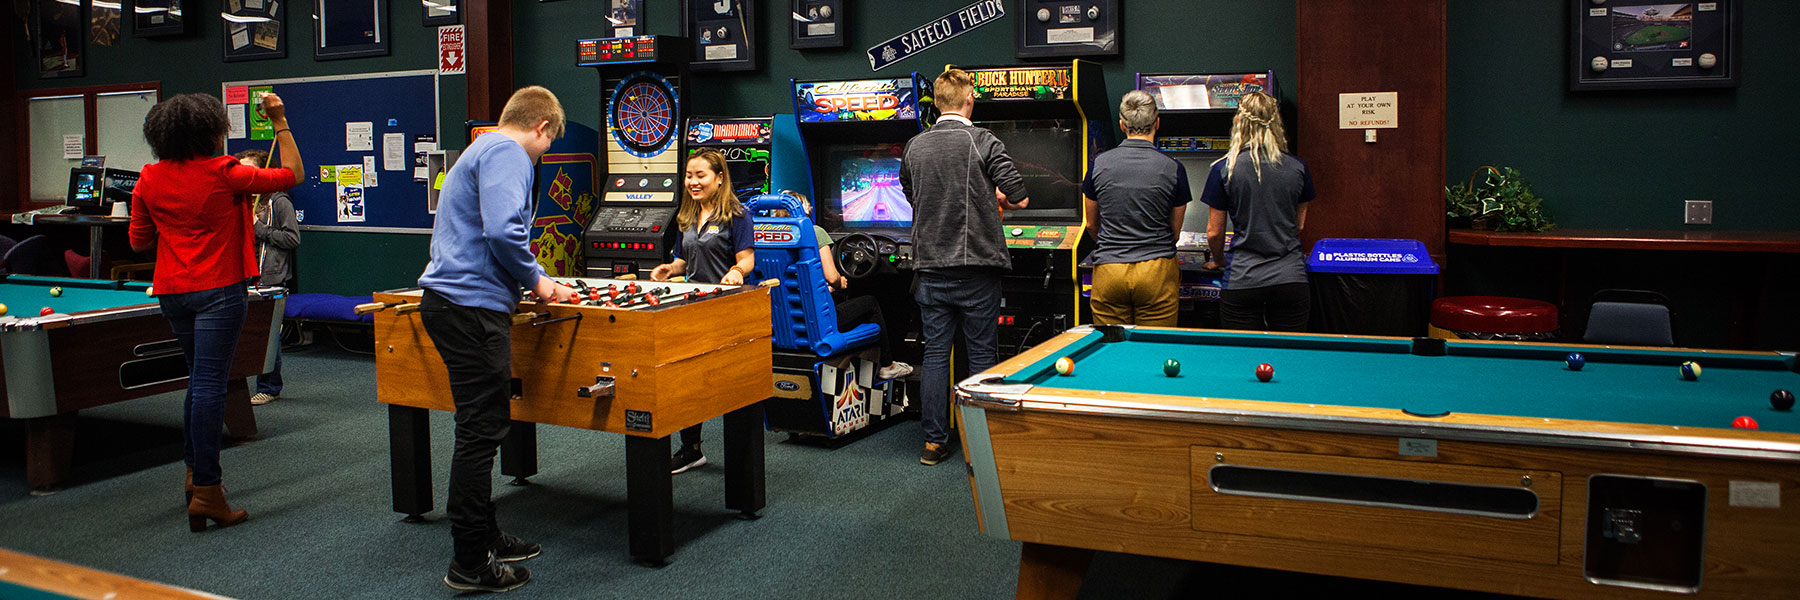 Students play foosball and pool in the Student Union Building rec room